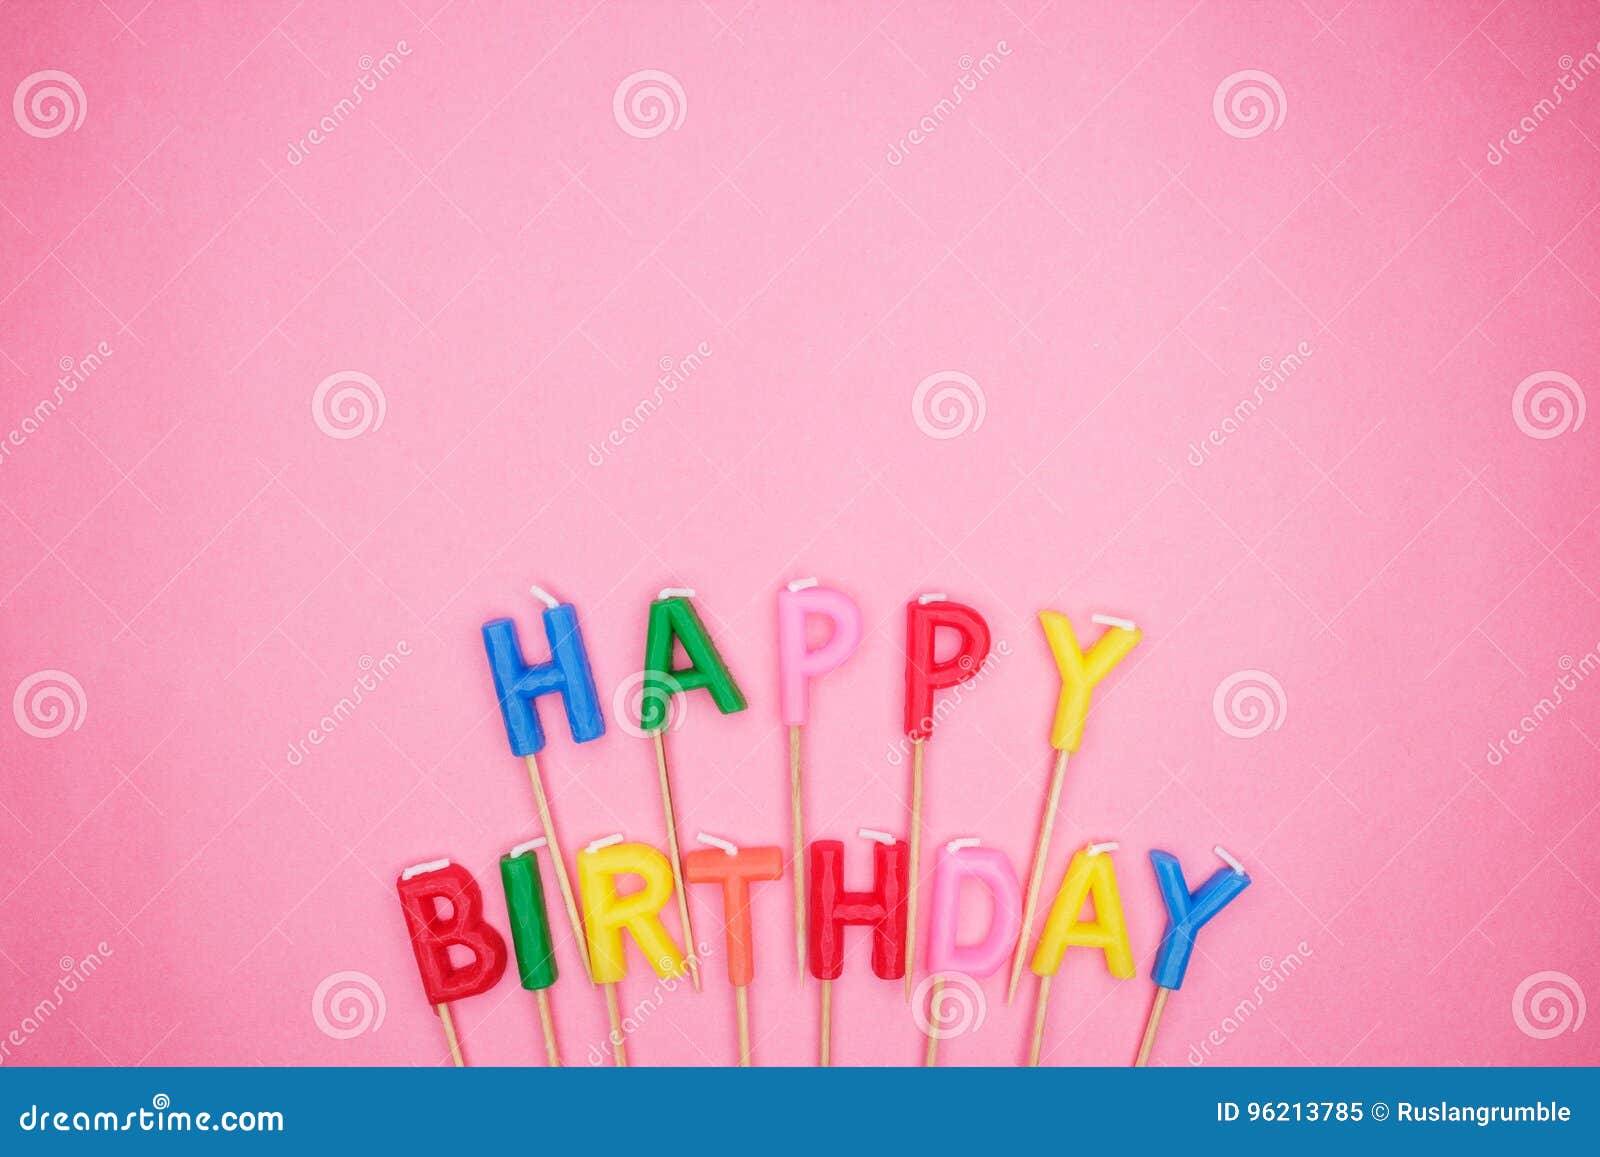 Letter-shaped Happy Birthday Candles Stock Image - Image of celebrate ...